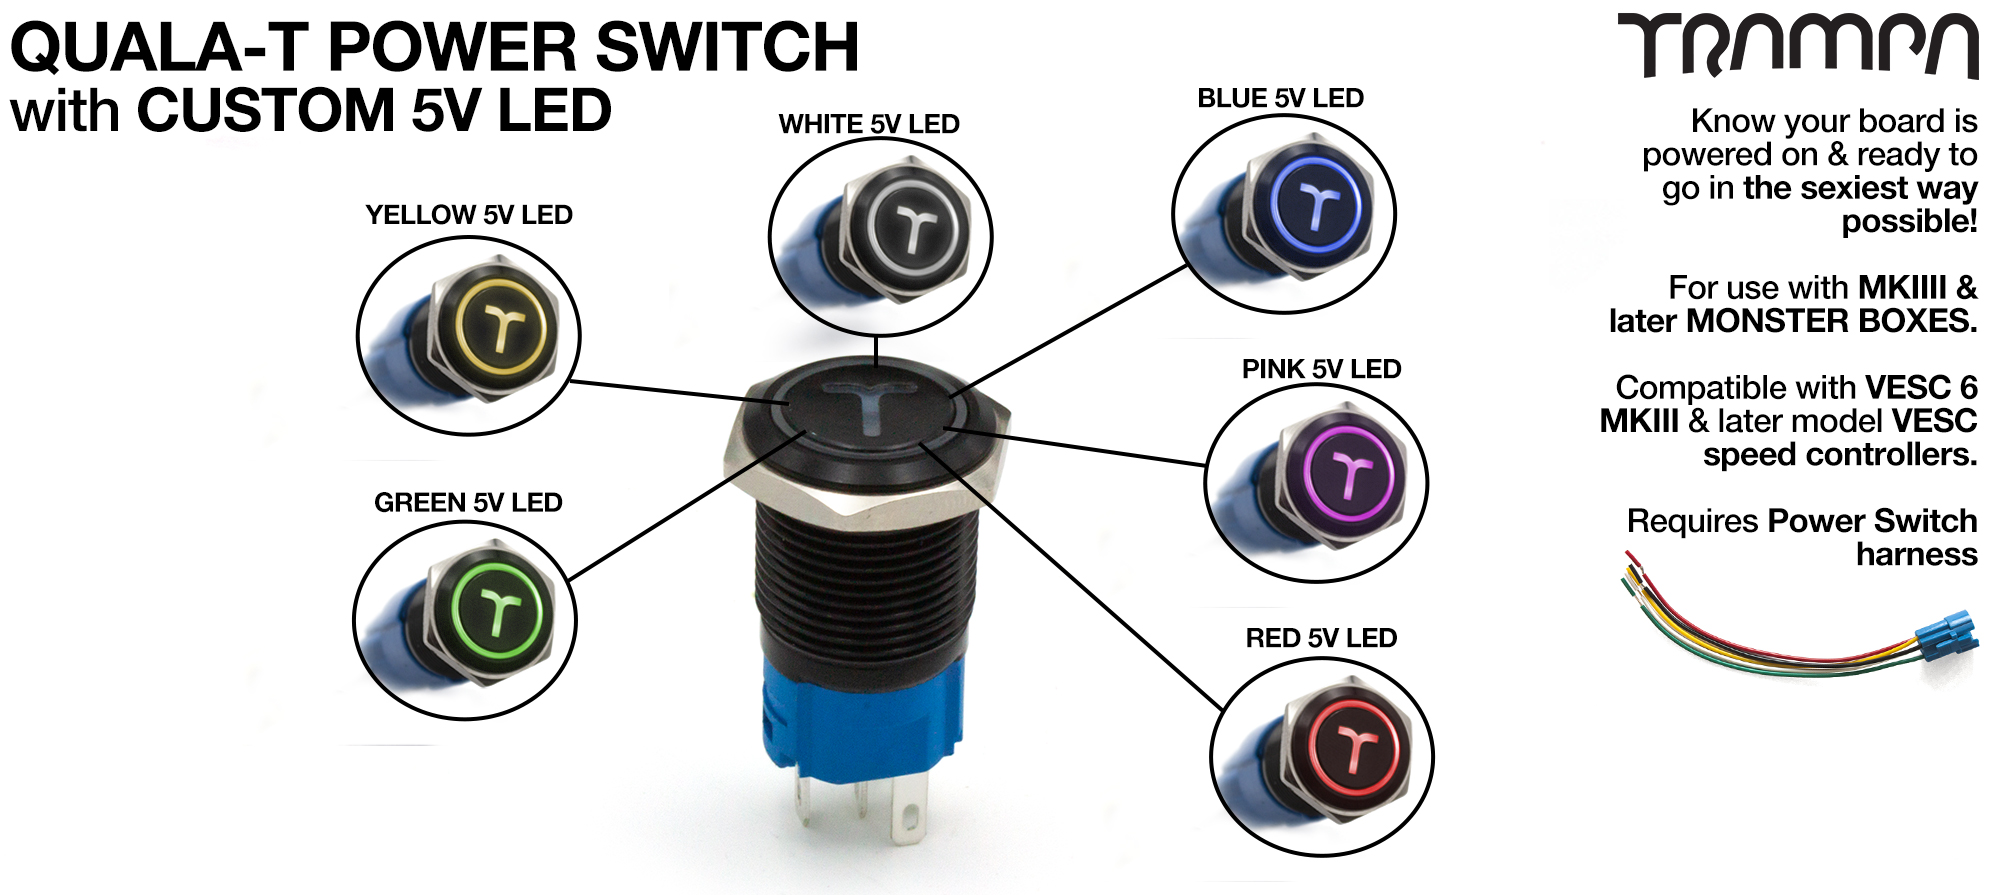 TRAMPA Switch with 5V LED QUALA-T logo & 16mm Stainless Steel Fixing Nut